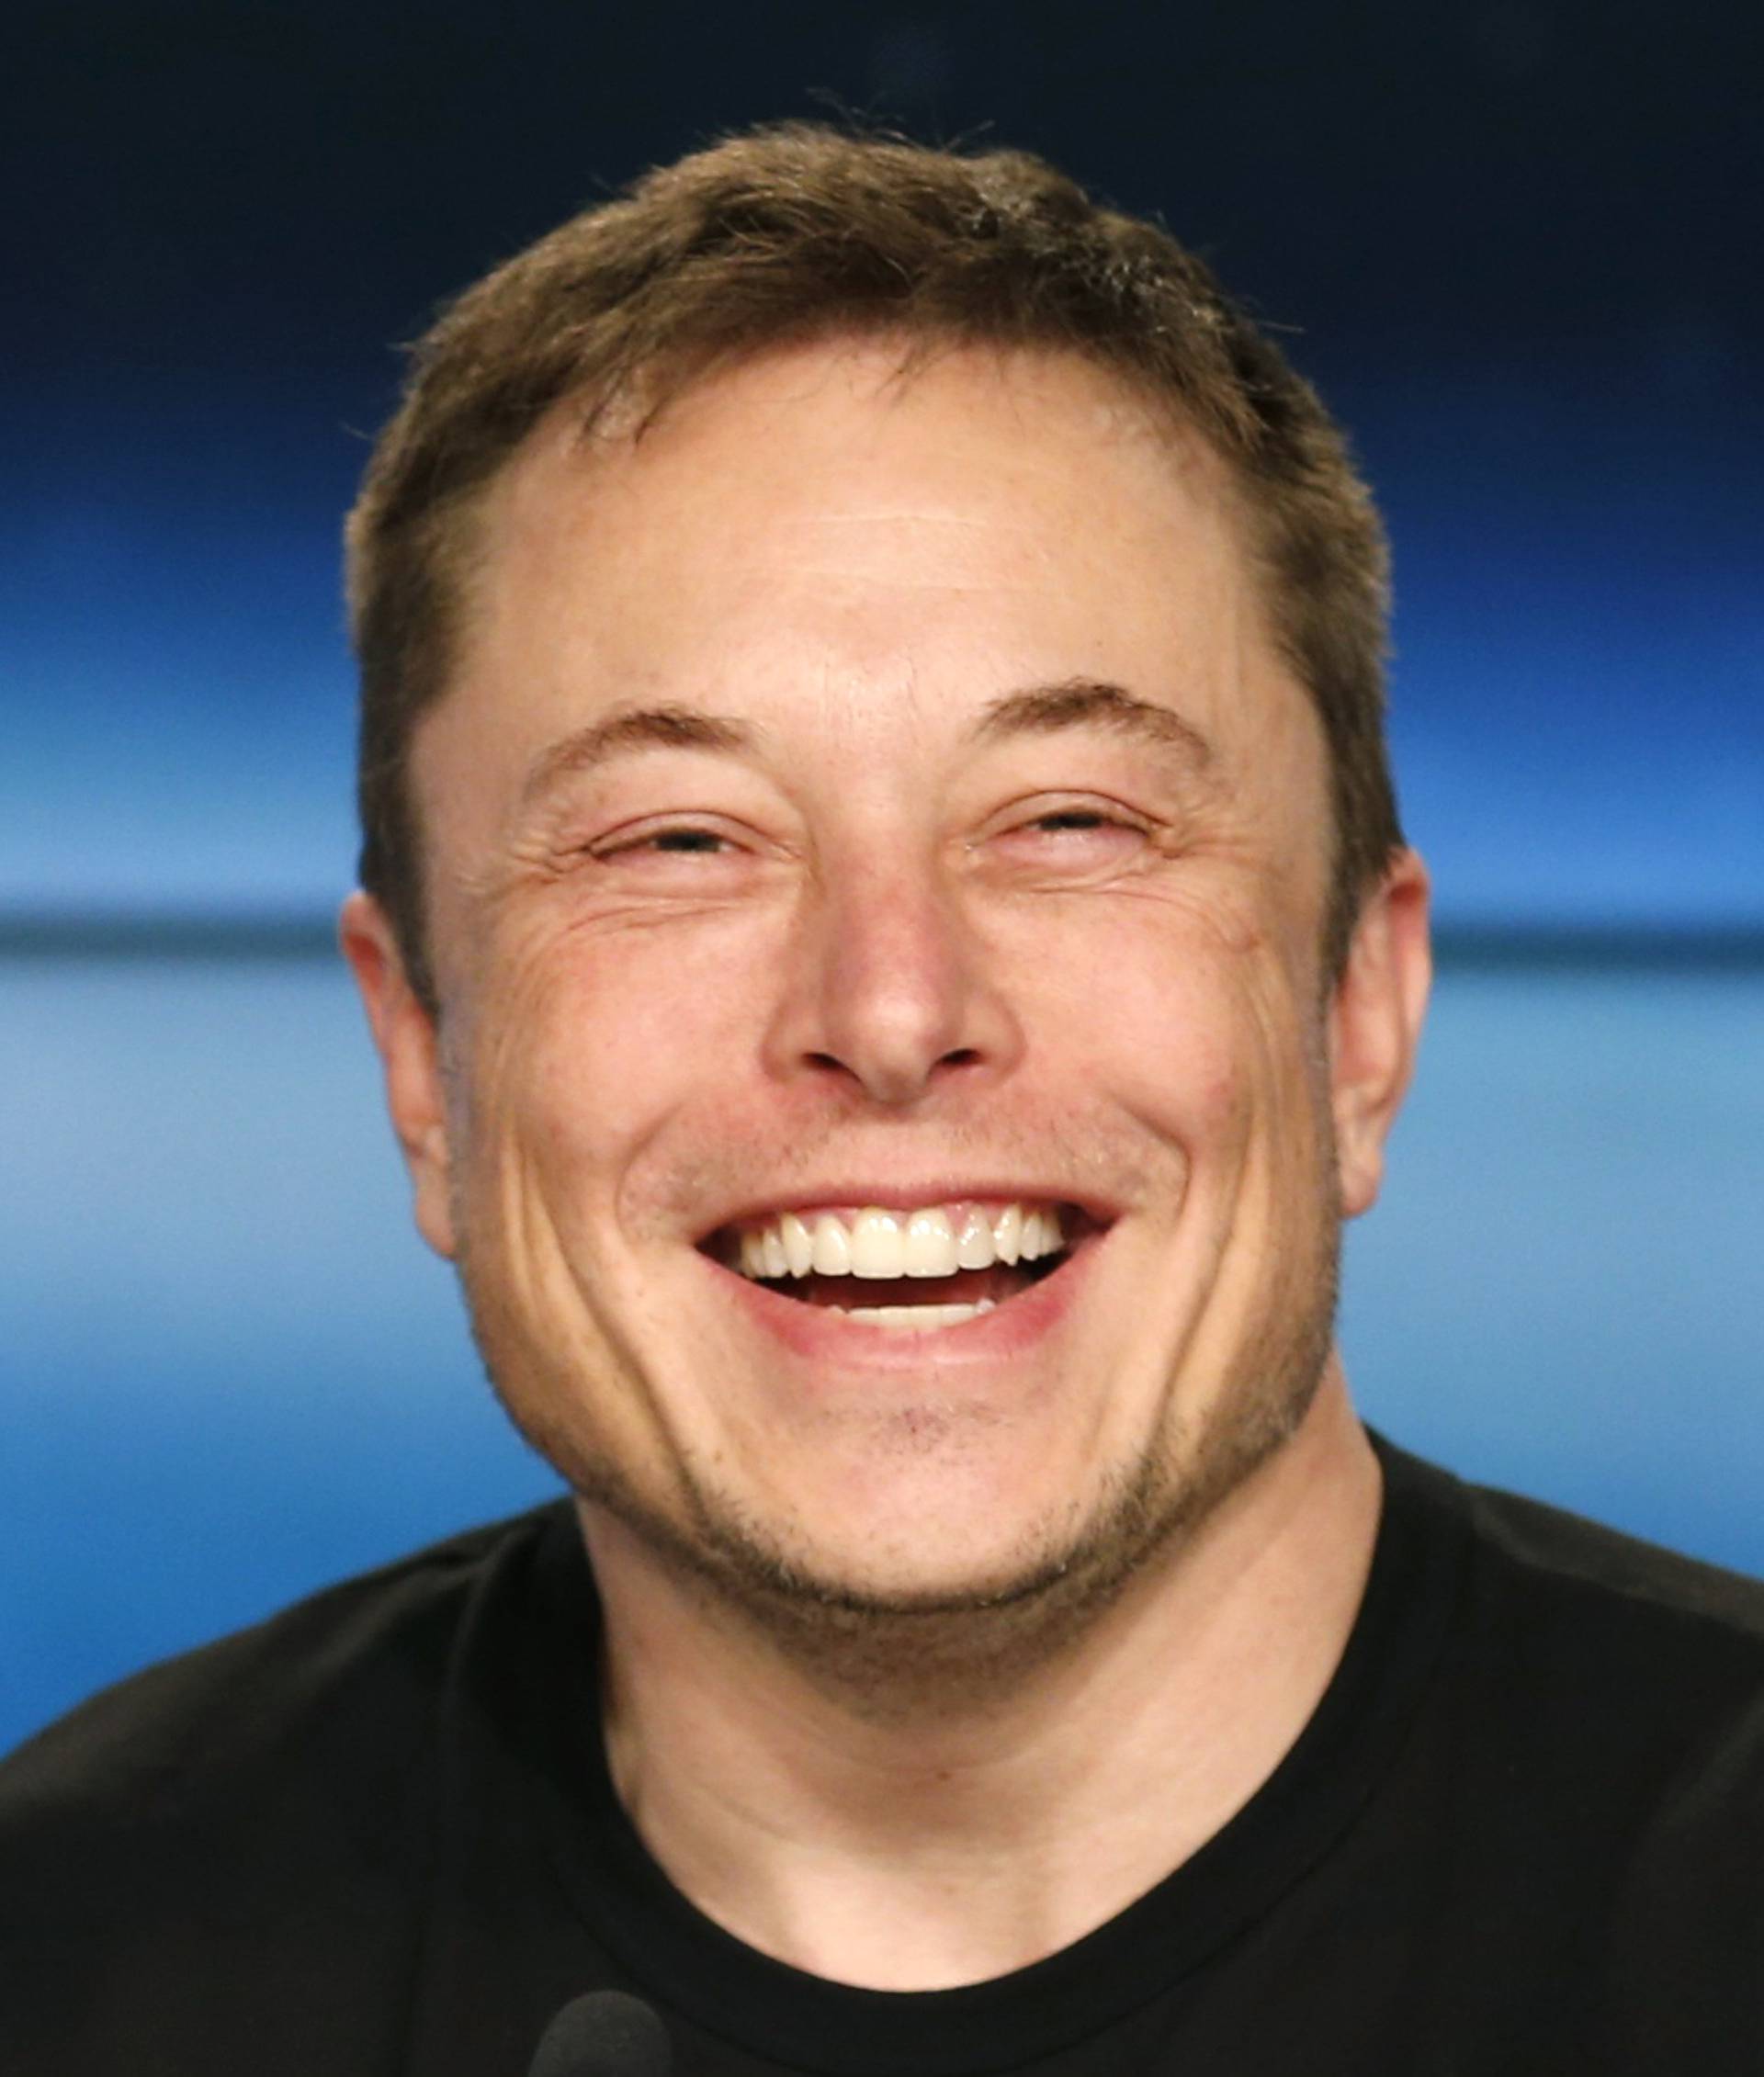 SpaceX founder Musk smiles at a press conference following the first launch of a SpaceX Falcon Heavy rocket in Cape Canaveral